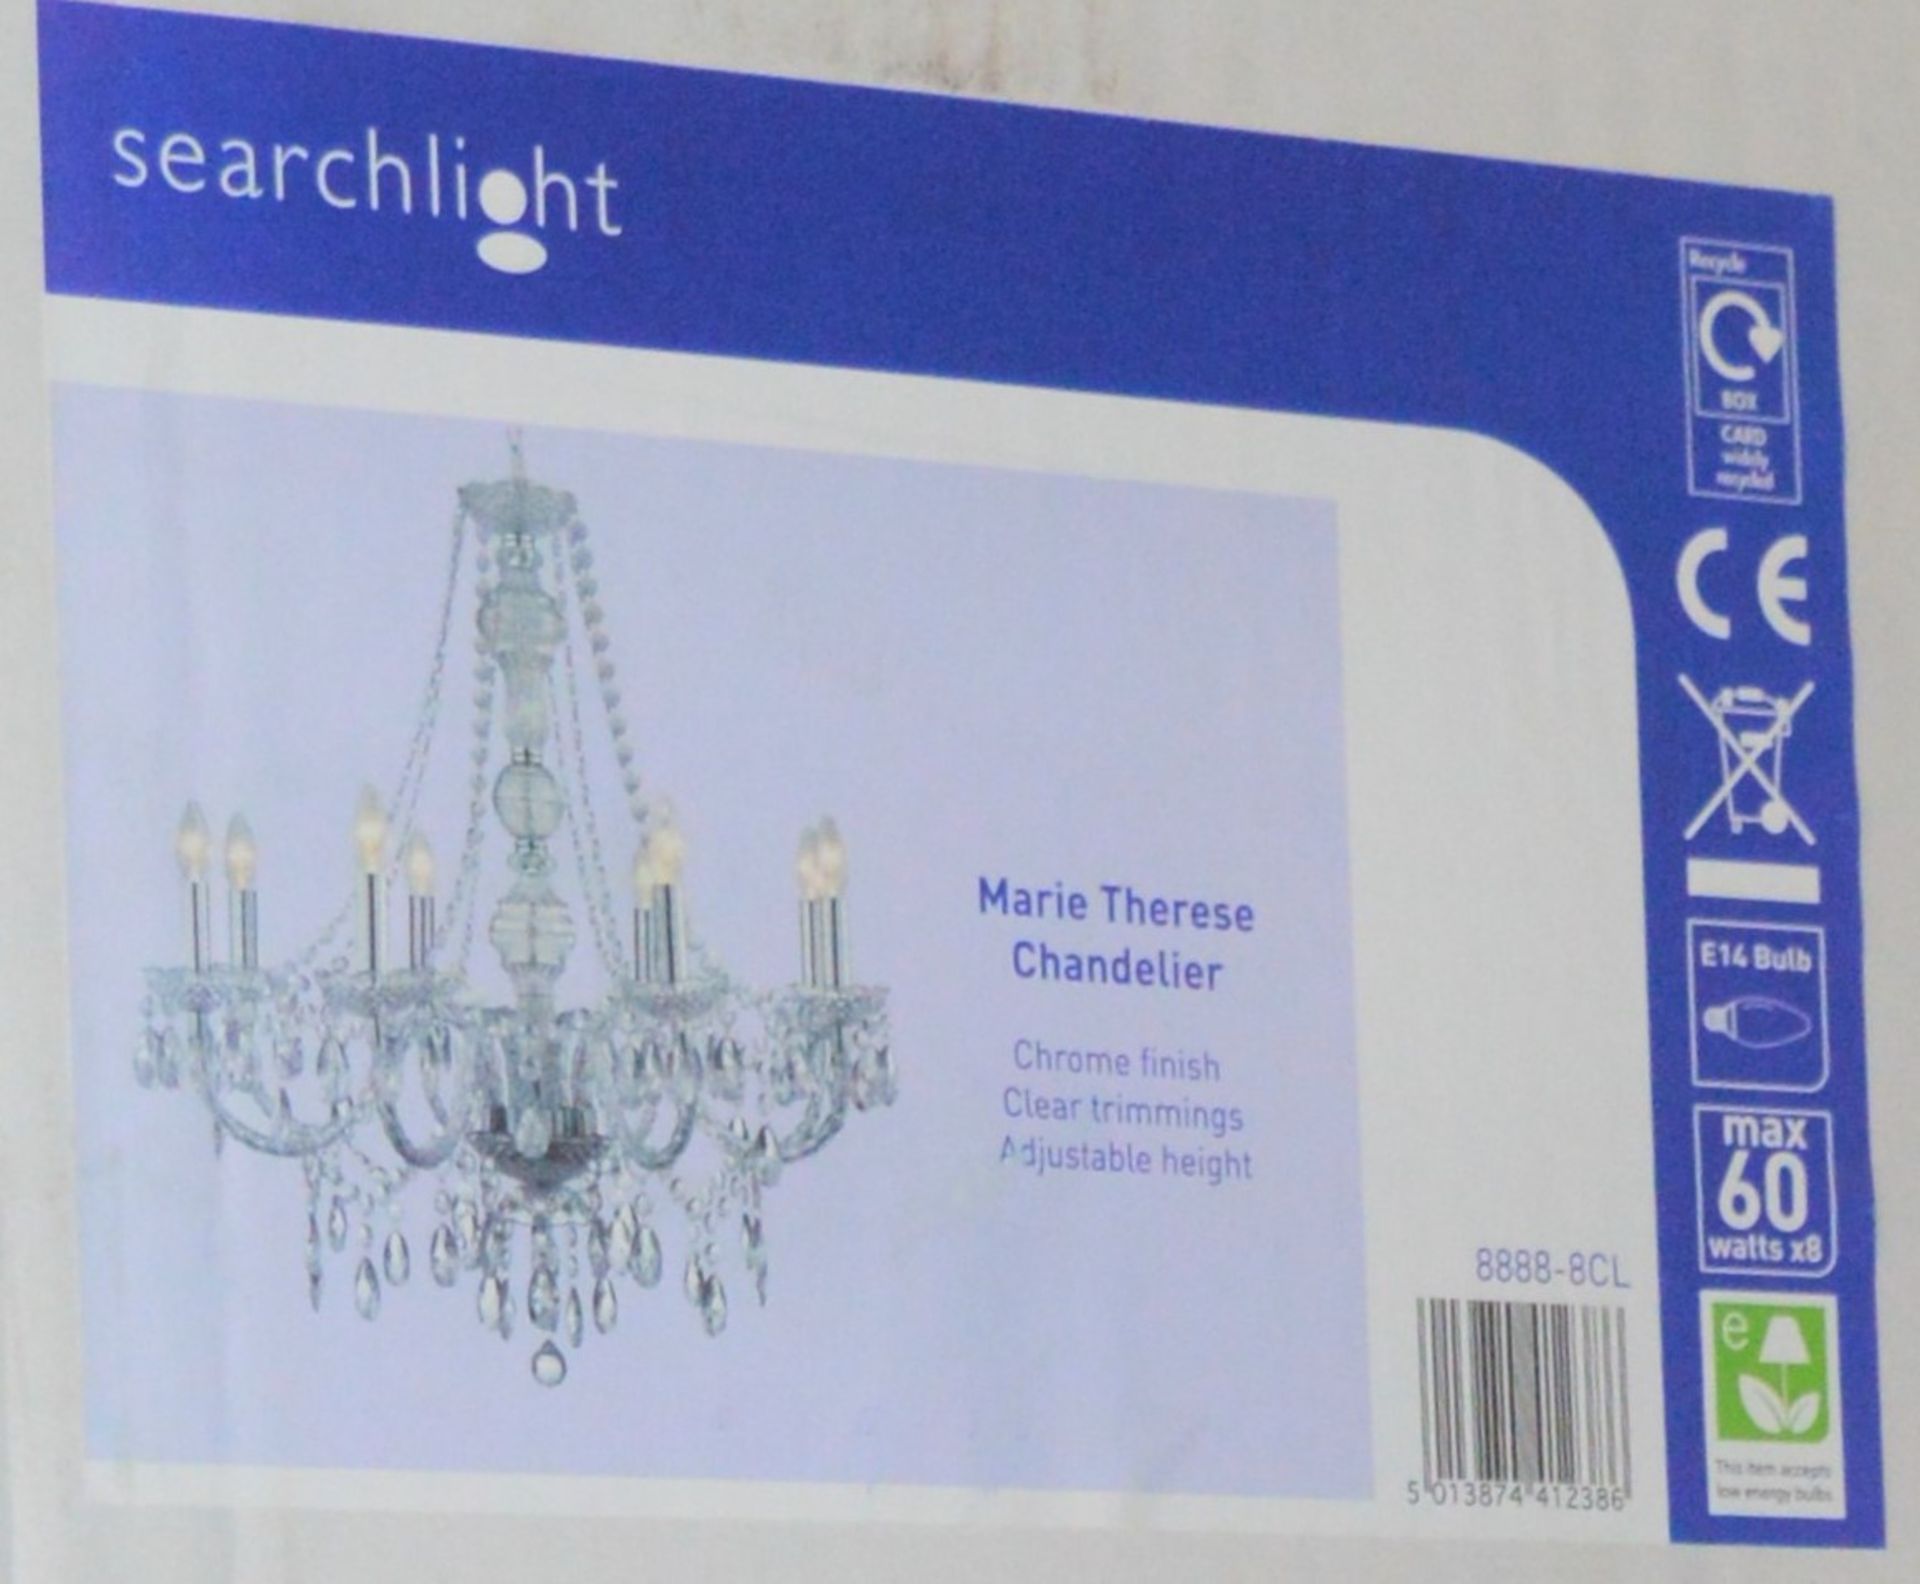 1 x Searchlight Marie Therese Chandelier - Chrome Finish With Clear Trimmings - Product Code 8888-